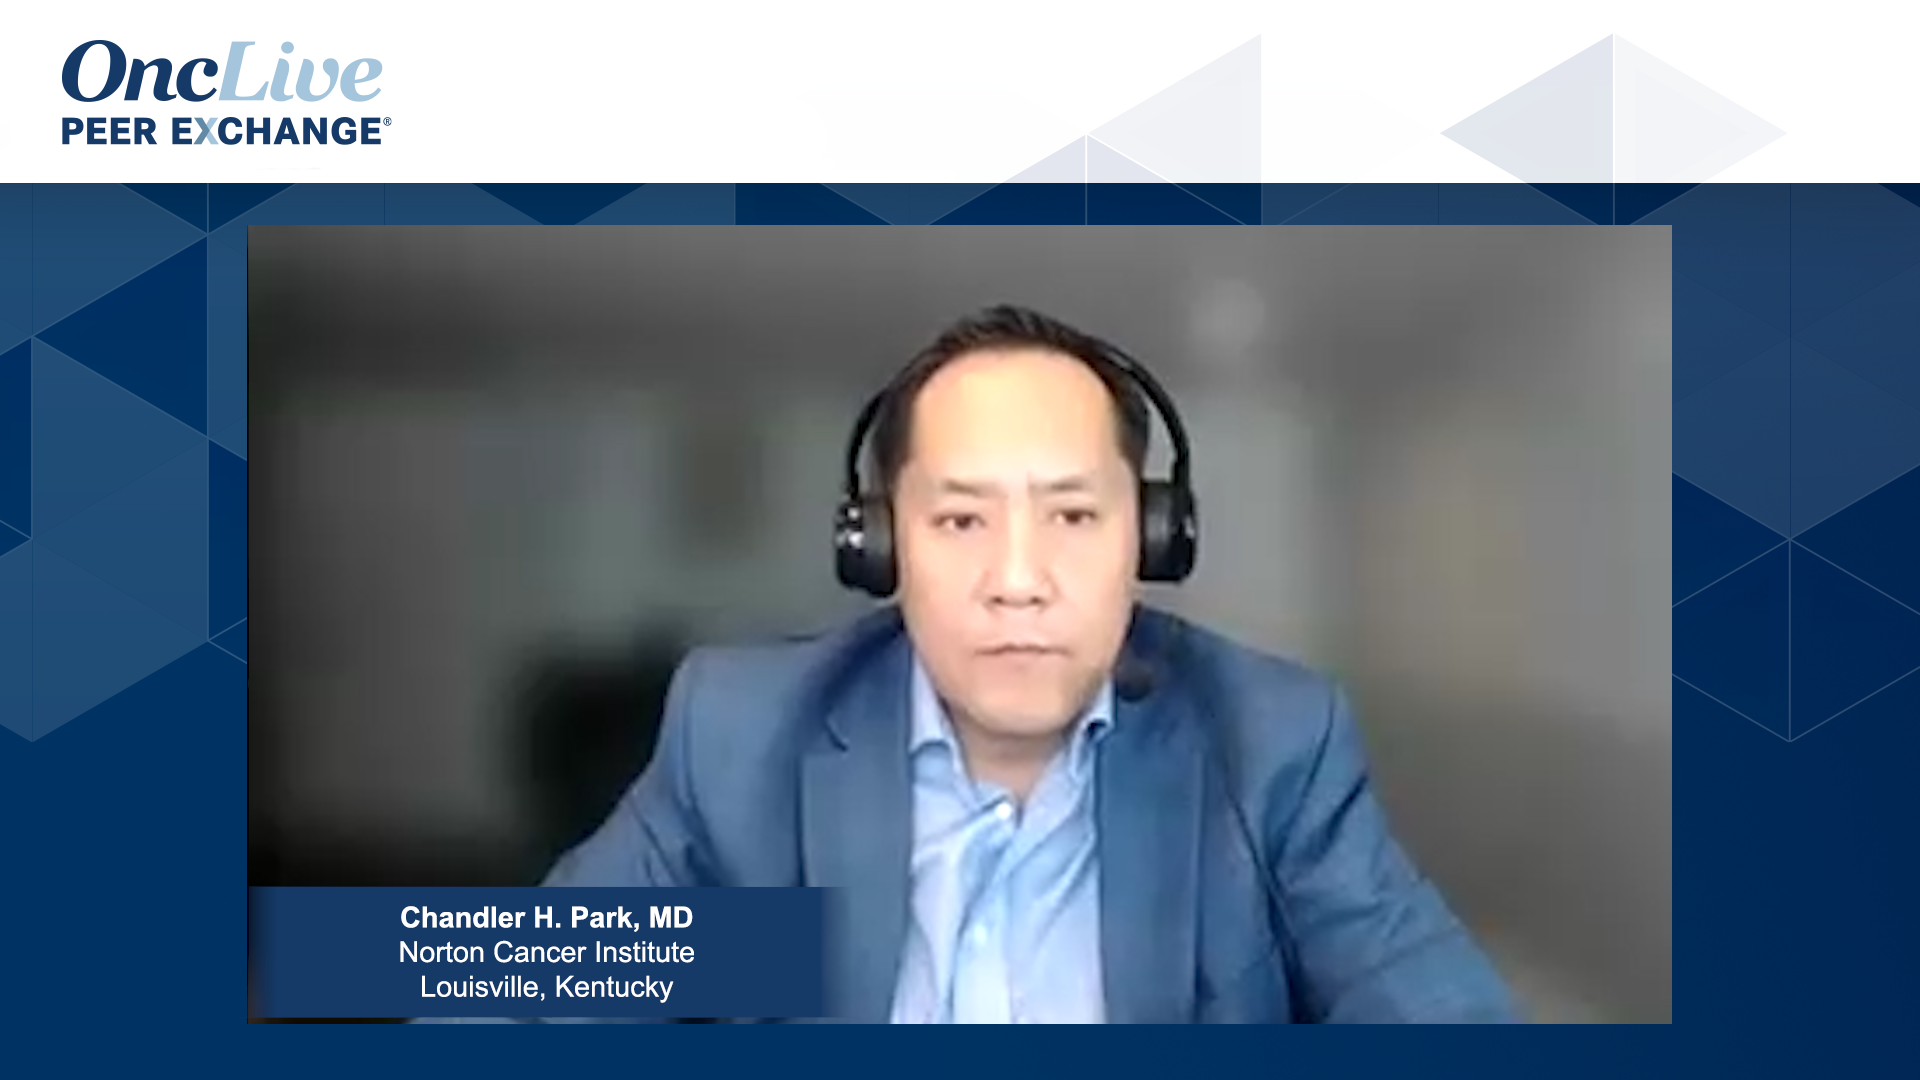 Chandler H. Park, MD, an expert on renal cell carcinoma